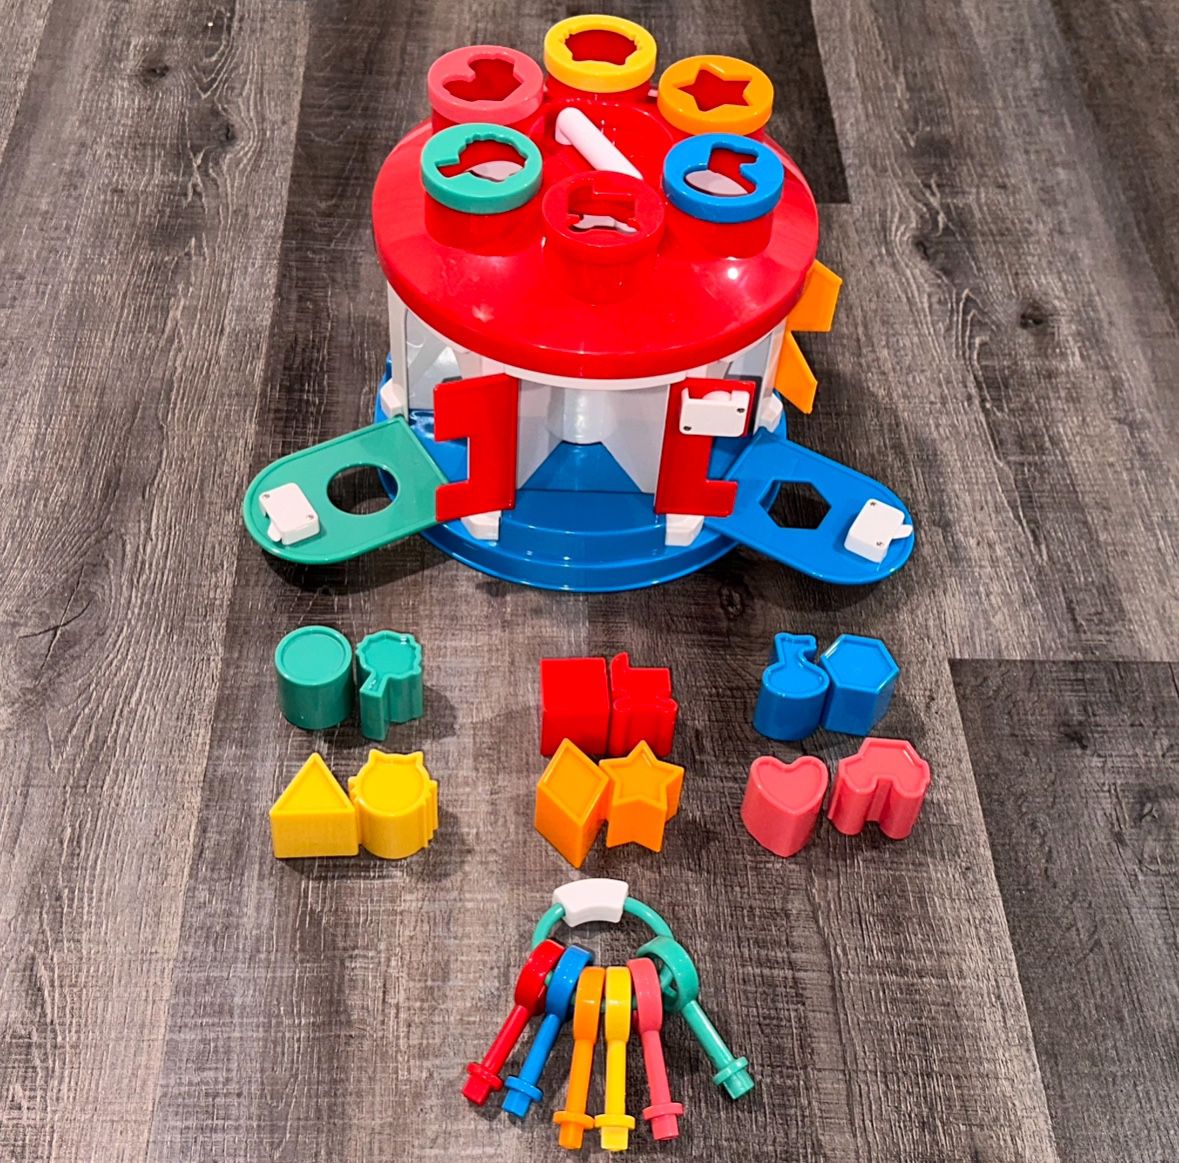 14-Piece Shape Sorting House Toy